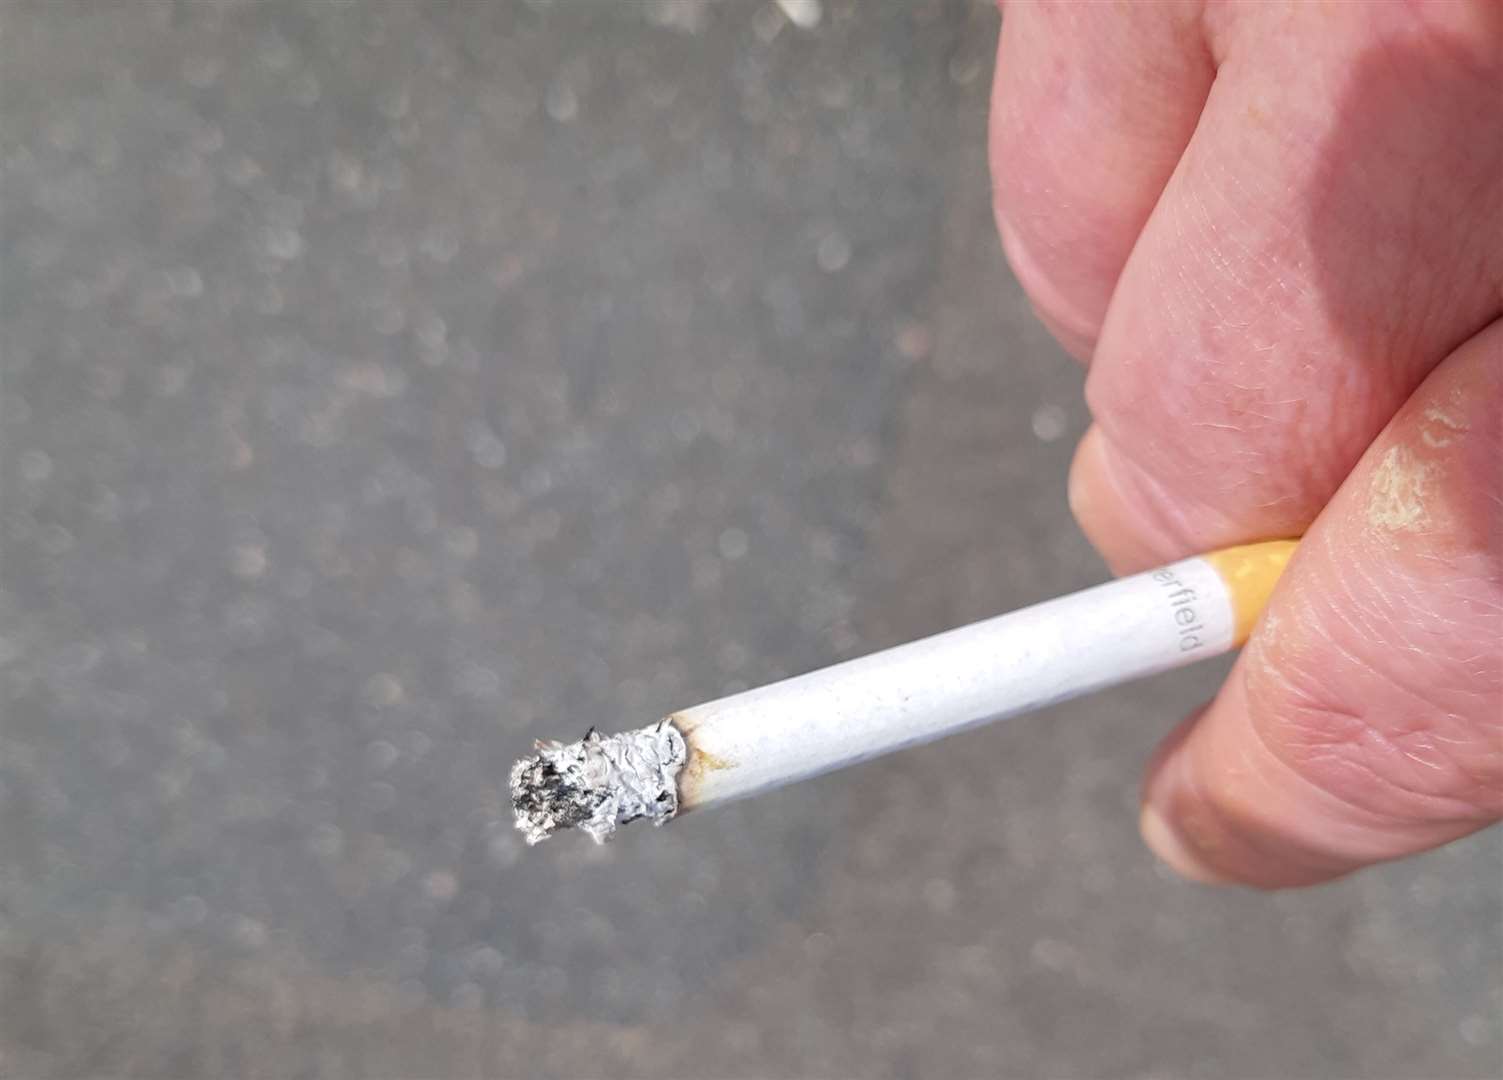 Smokers are asked to dispose of their cigarette ends responsibly